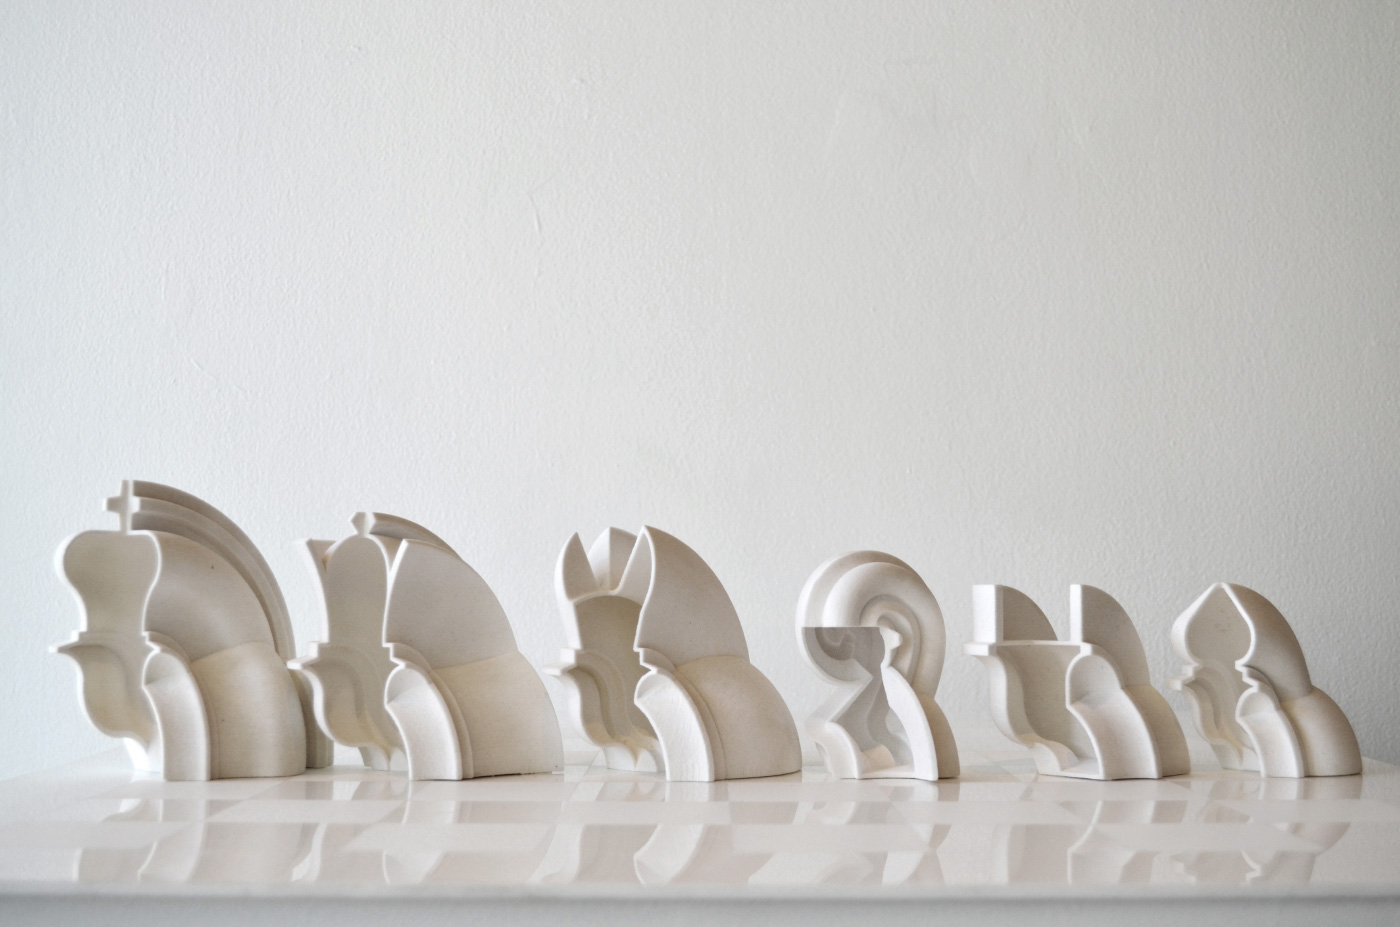 White, highly-designed chess set with curved pieces designed by Spinagu